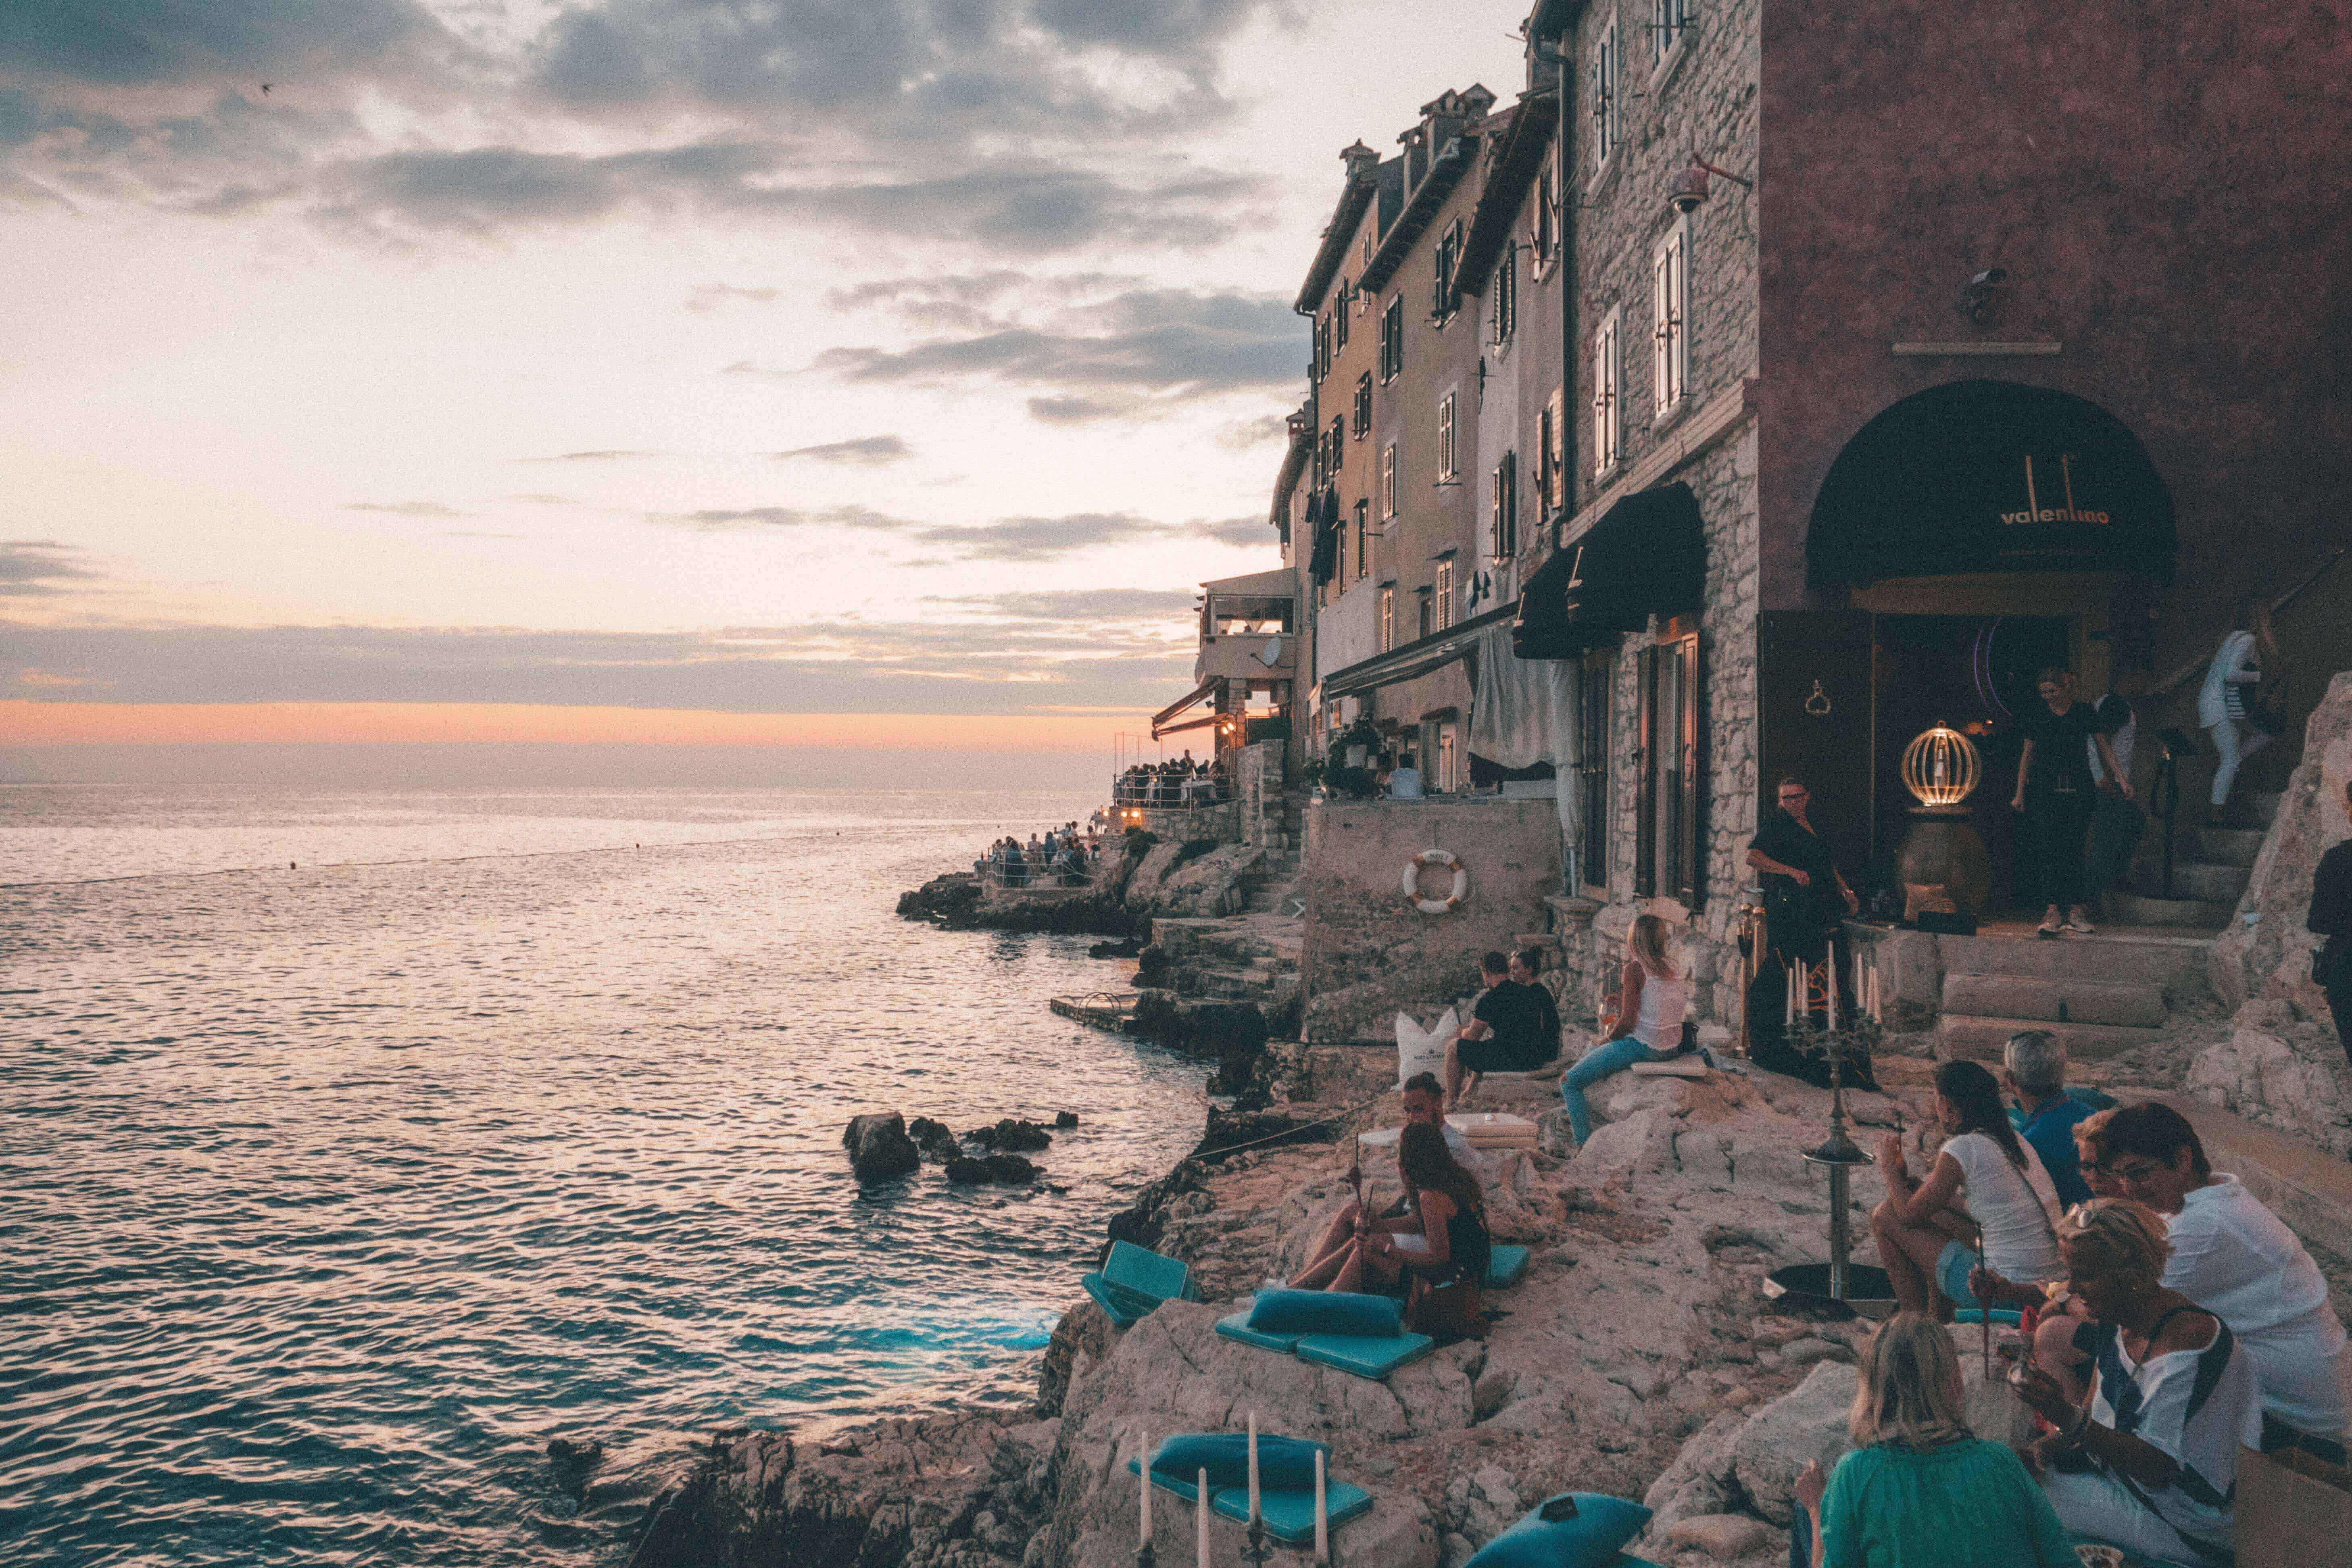 How to Spend 2 Days in Istria, Croatia | View from Valentino Cocktail Bar | The Republic of Rose | 48 Hours Exploring Pula and Rovinj | #Pula #Rovinj #Istria #Croatia